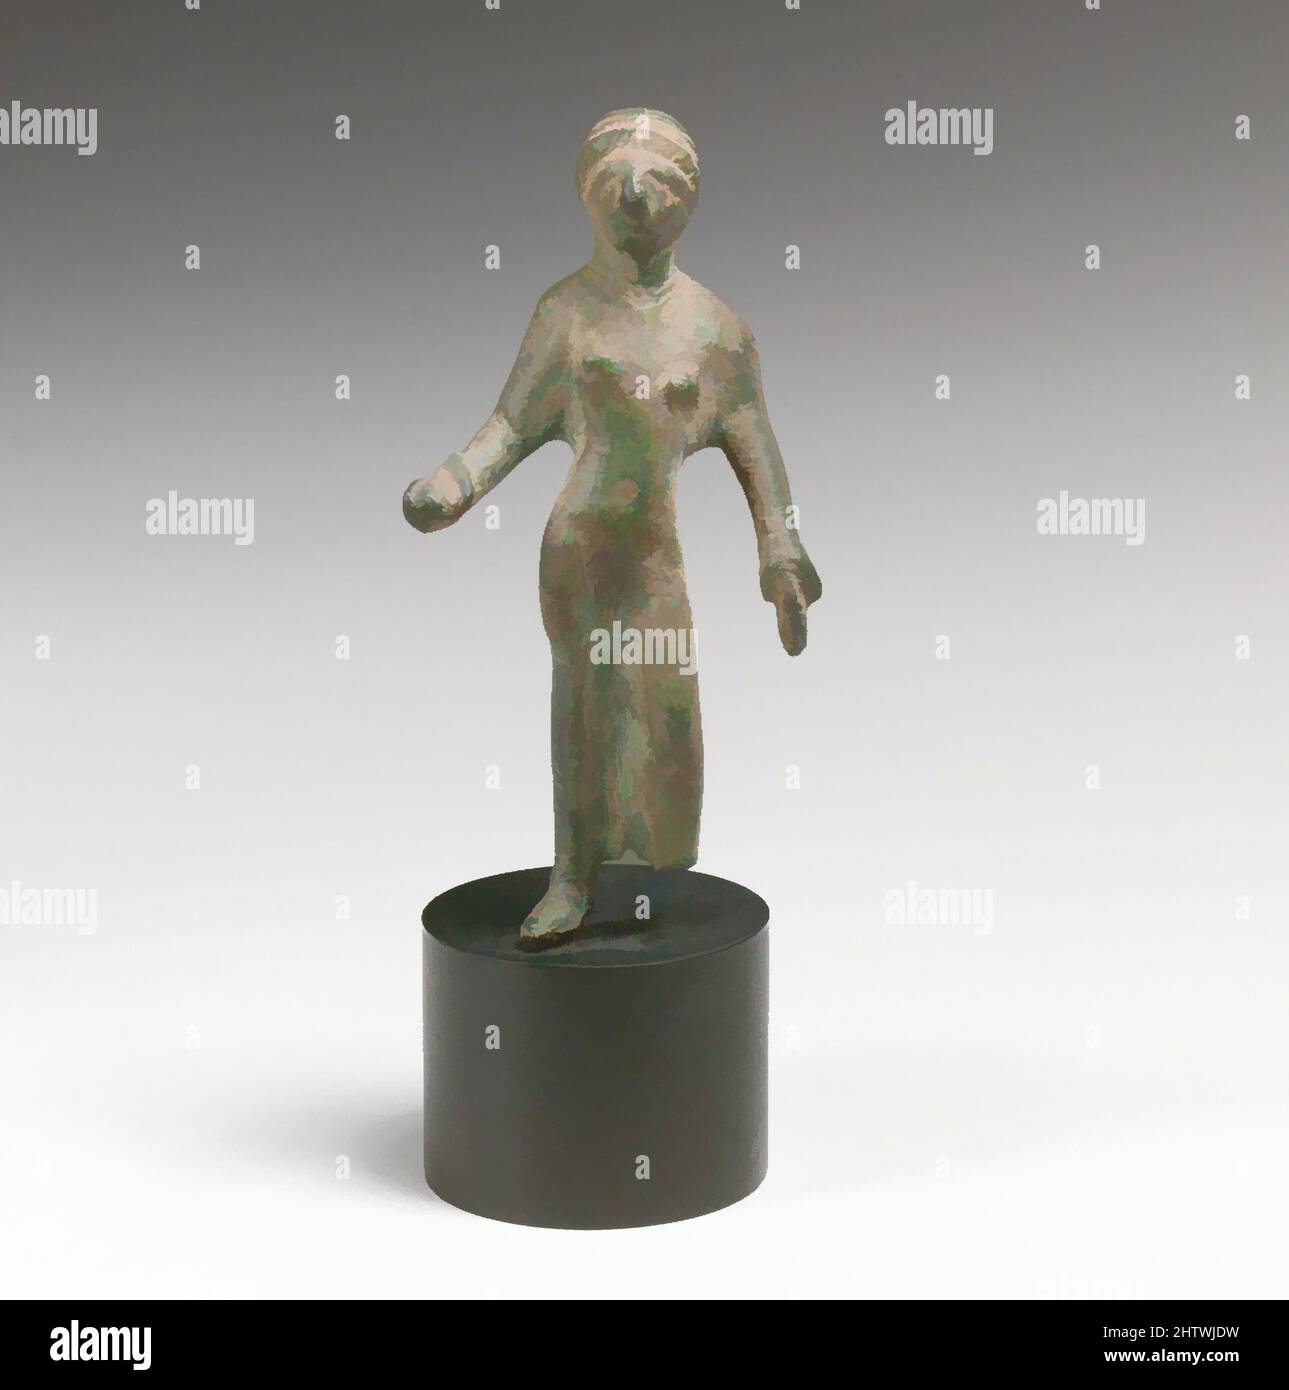 Art inspired by Statuette of a woman, Bronze, H.: 3 7/16 in. (8.7 cm), Bronzes, Classic works modernized by Artotop with a splash of modernity. Shapes, color and value, eye-catching visual impact on art. Emotions through freedom of artworks in a contemporary way. A timeless message pursuing a wildly creative new direction. Artists turning to the digital medium and creating the Artotop NFT Stock Photo